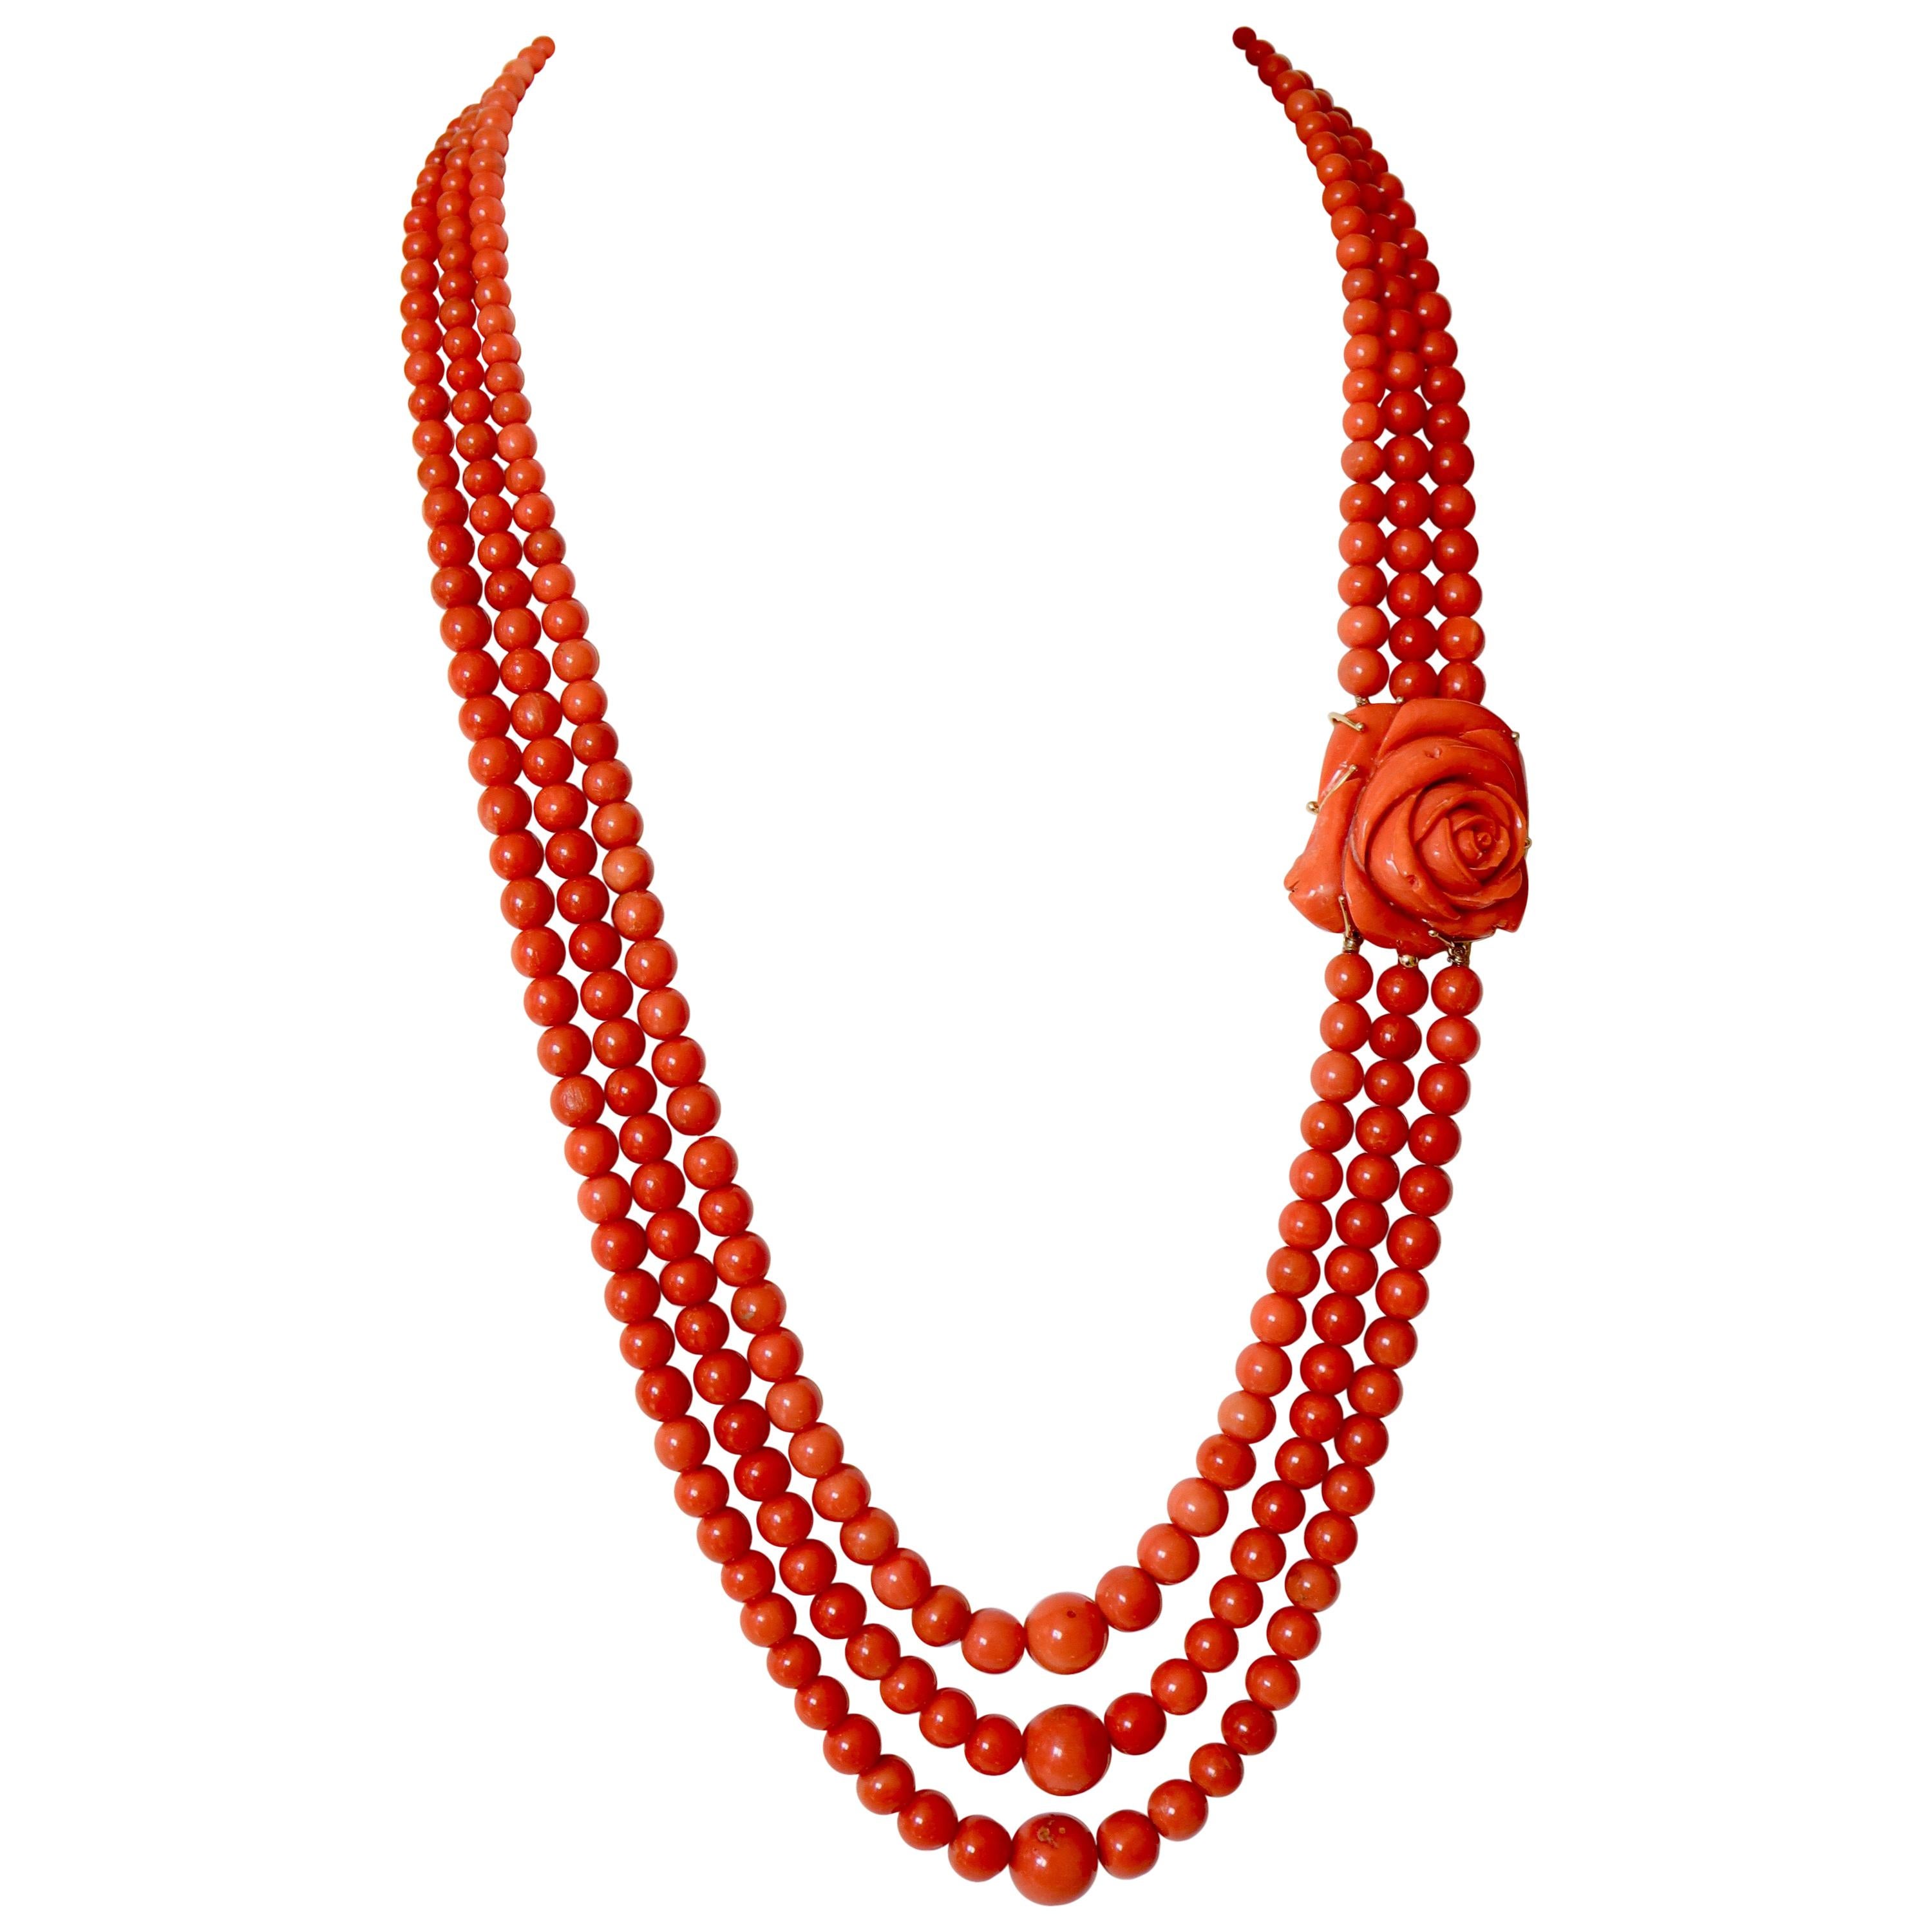 Coral Beads Long Necklace 3 Rows and Rose Coral Clasp and 18 Carat Gold